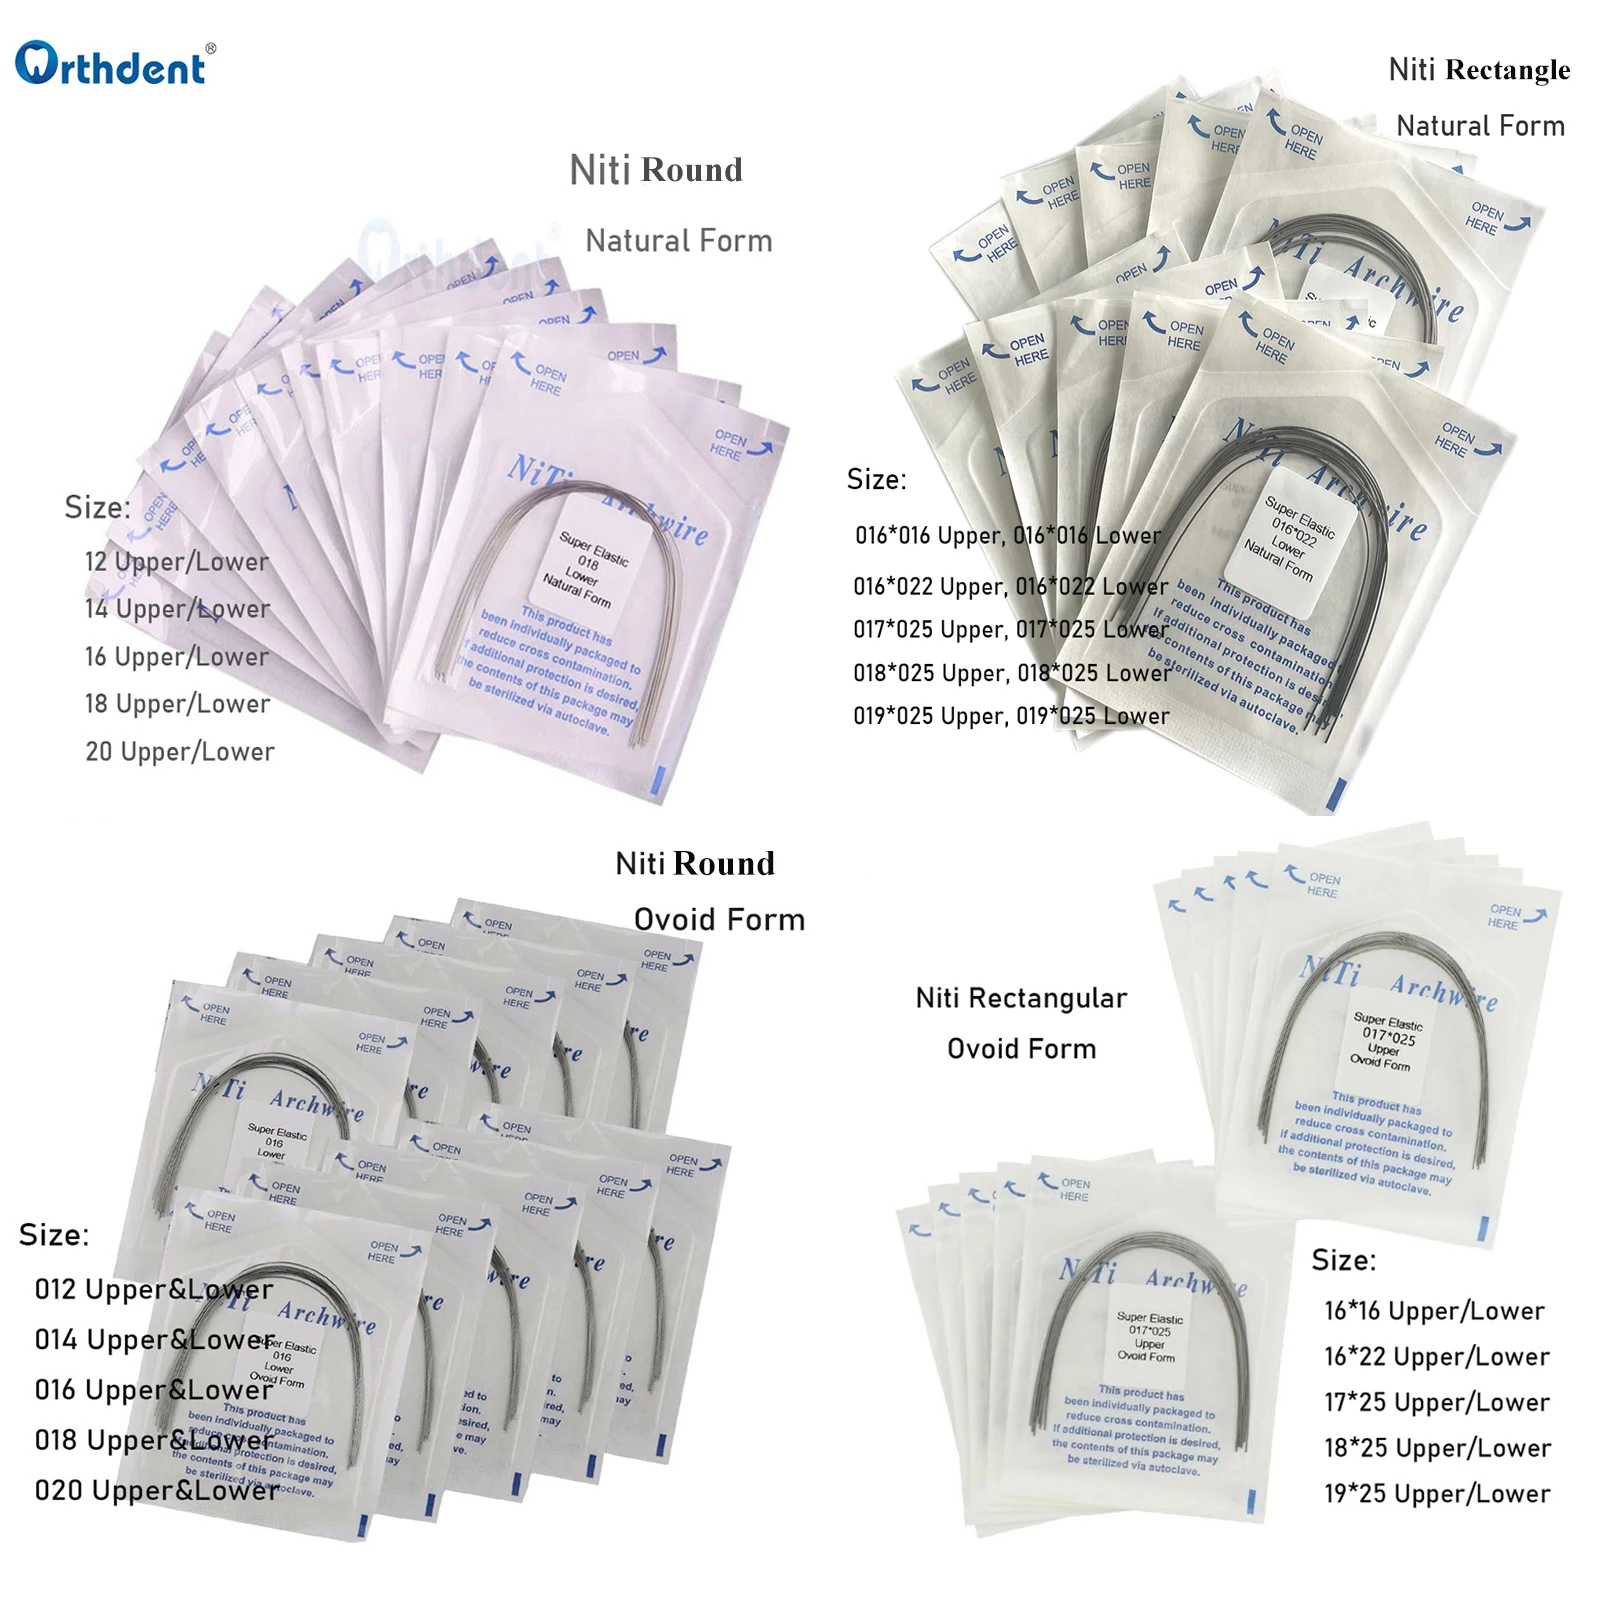 Orthdent 10 Packs Dental Arch Wires Orthodontic Super Elastic NITI Round / Rectangle Archwire Natural / Ovoid Form Upper / Lower